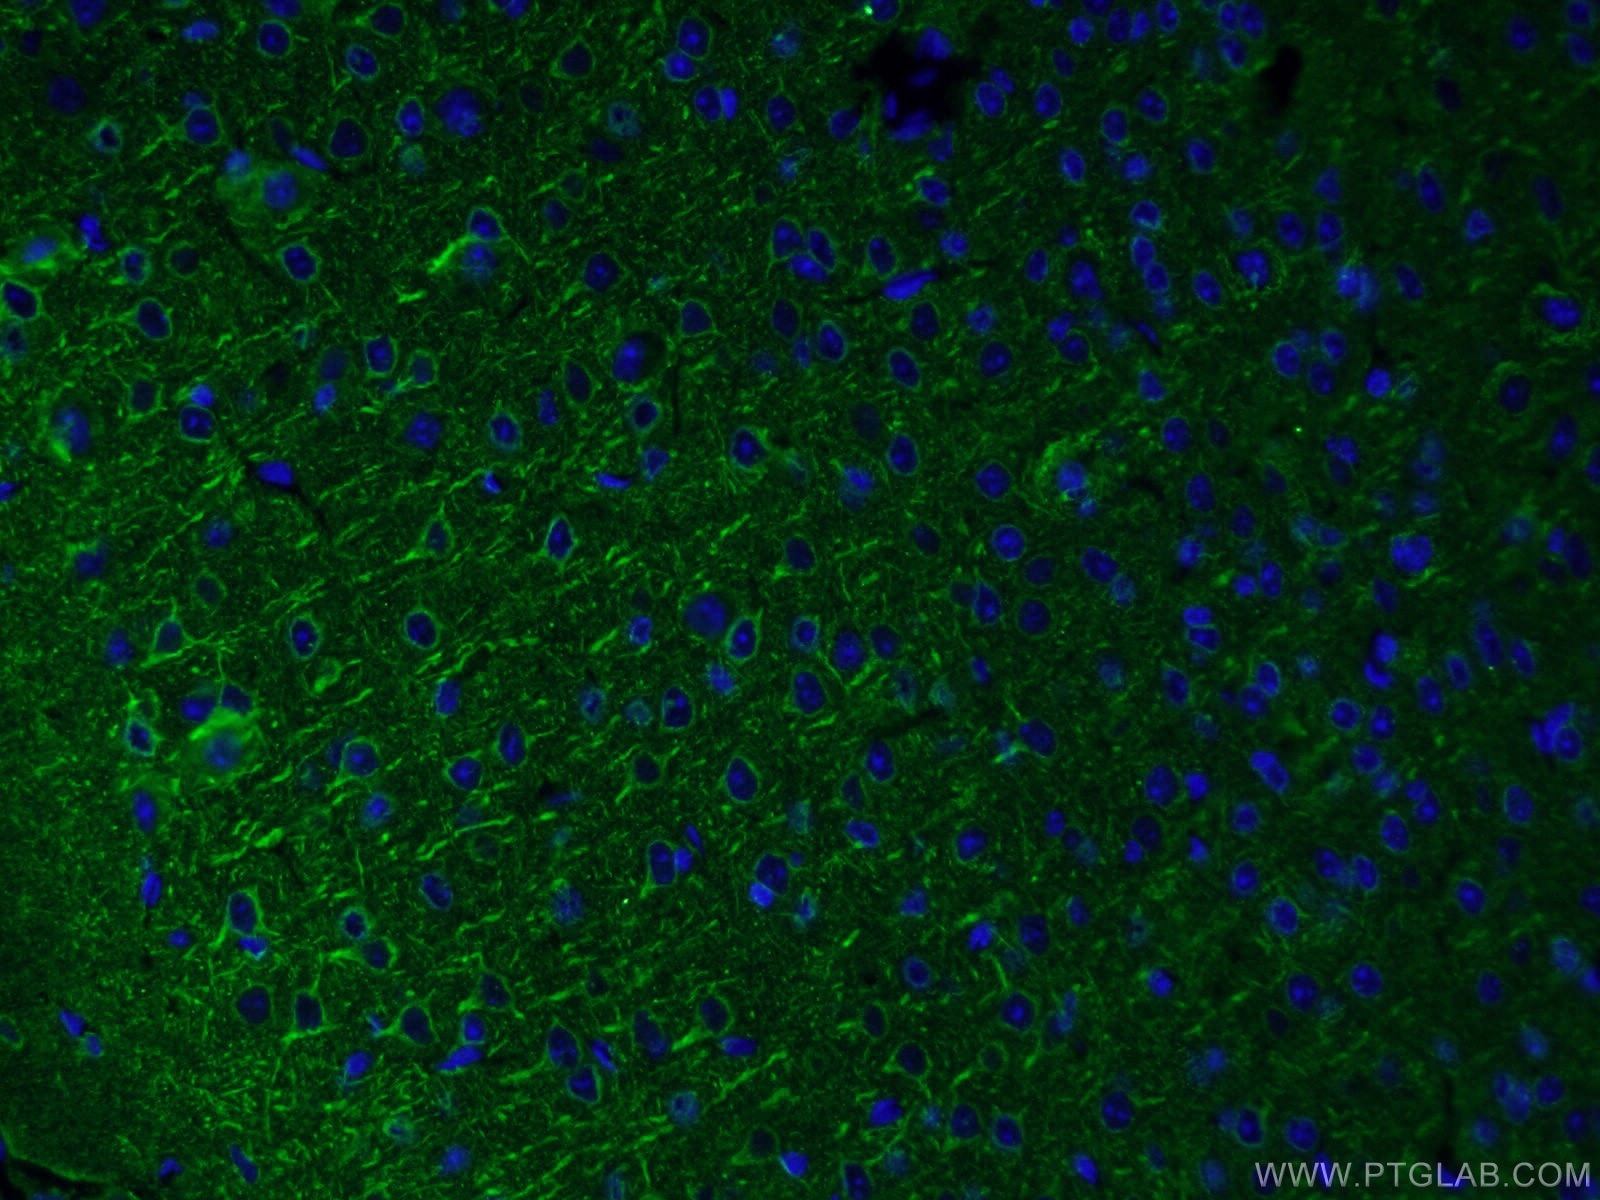 acetylated Tubulin(Lys40) Antibody IF mouse brain tissue 66200-1-Ig